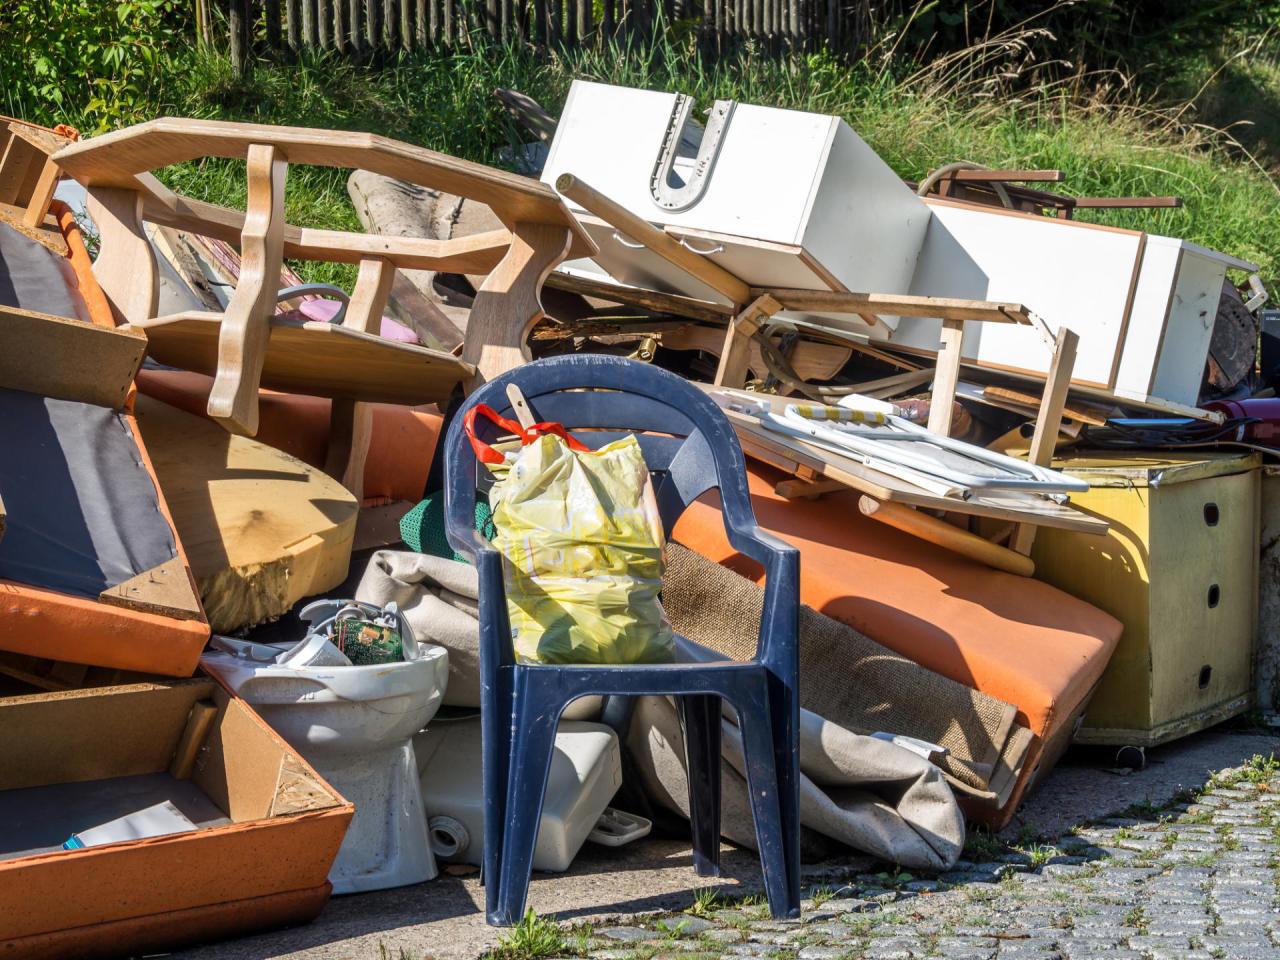 Residential & Commercial Junk Removal Services